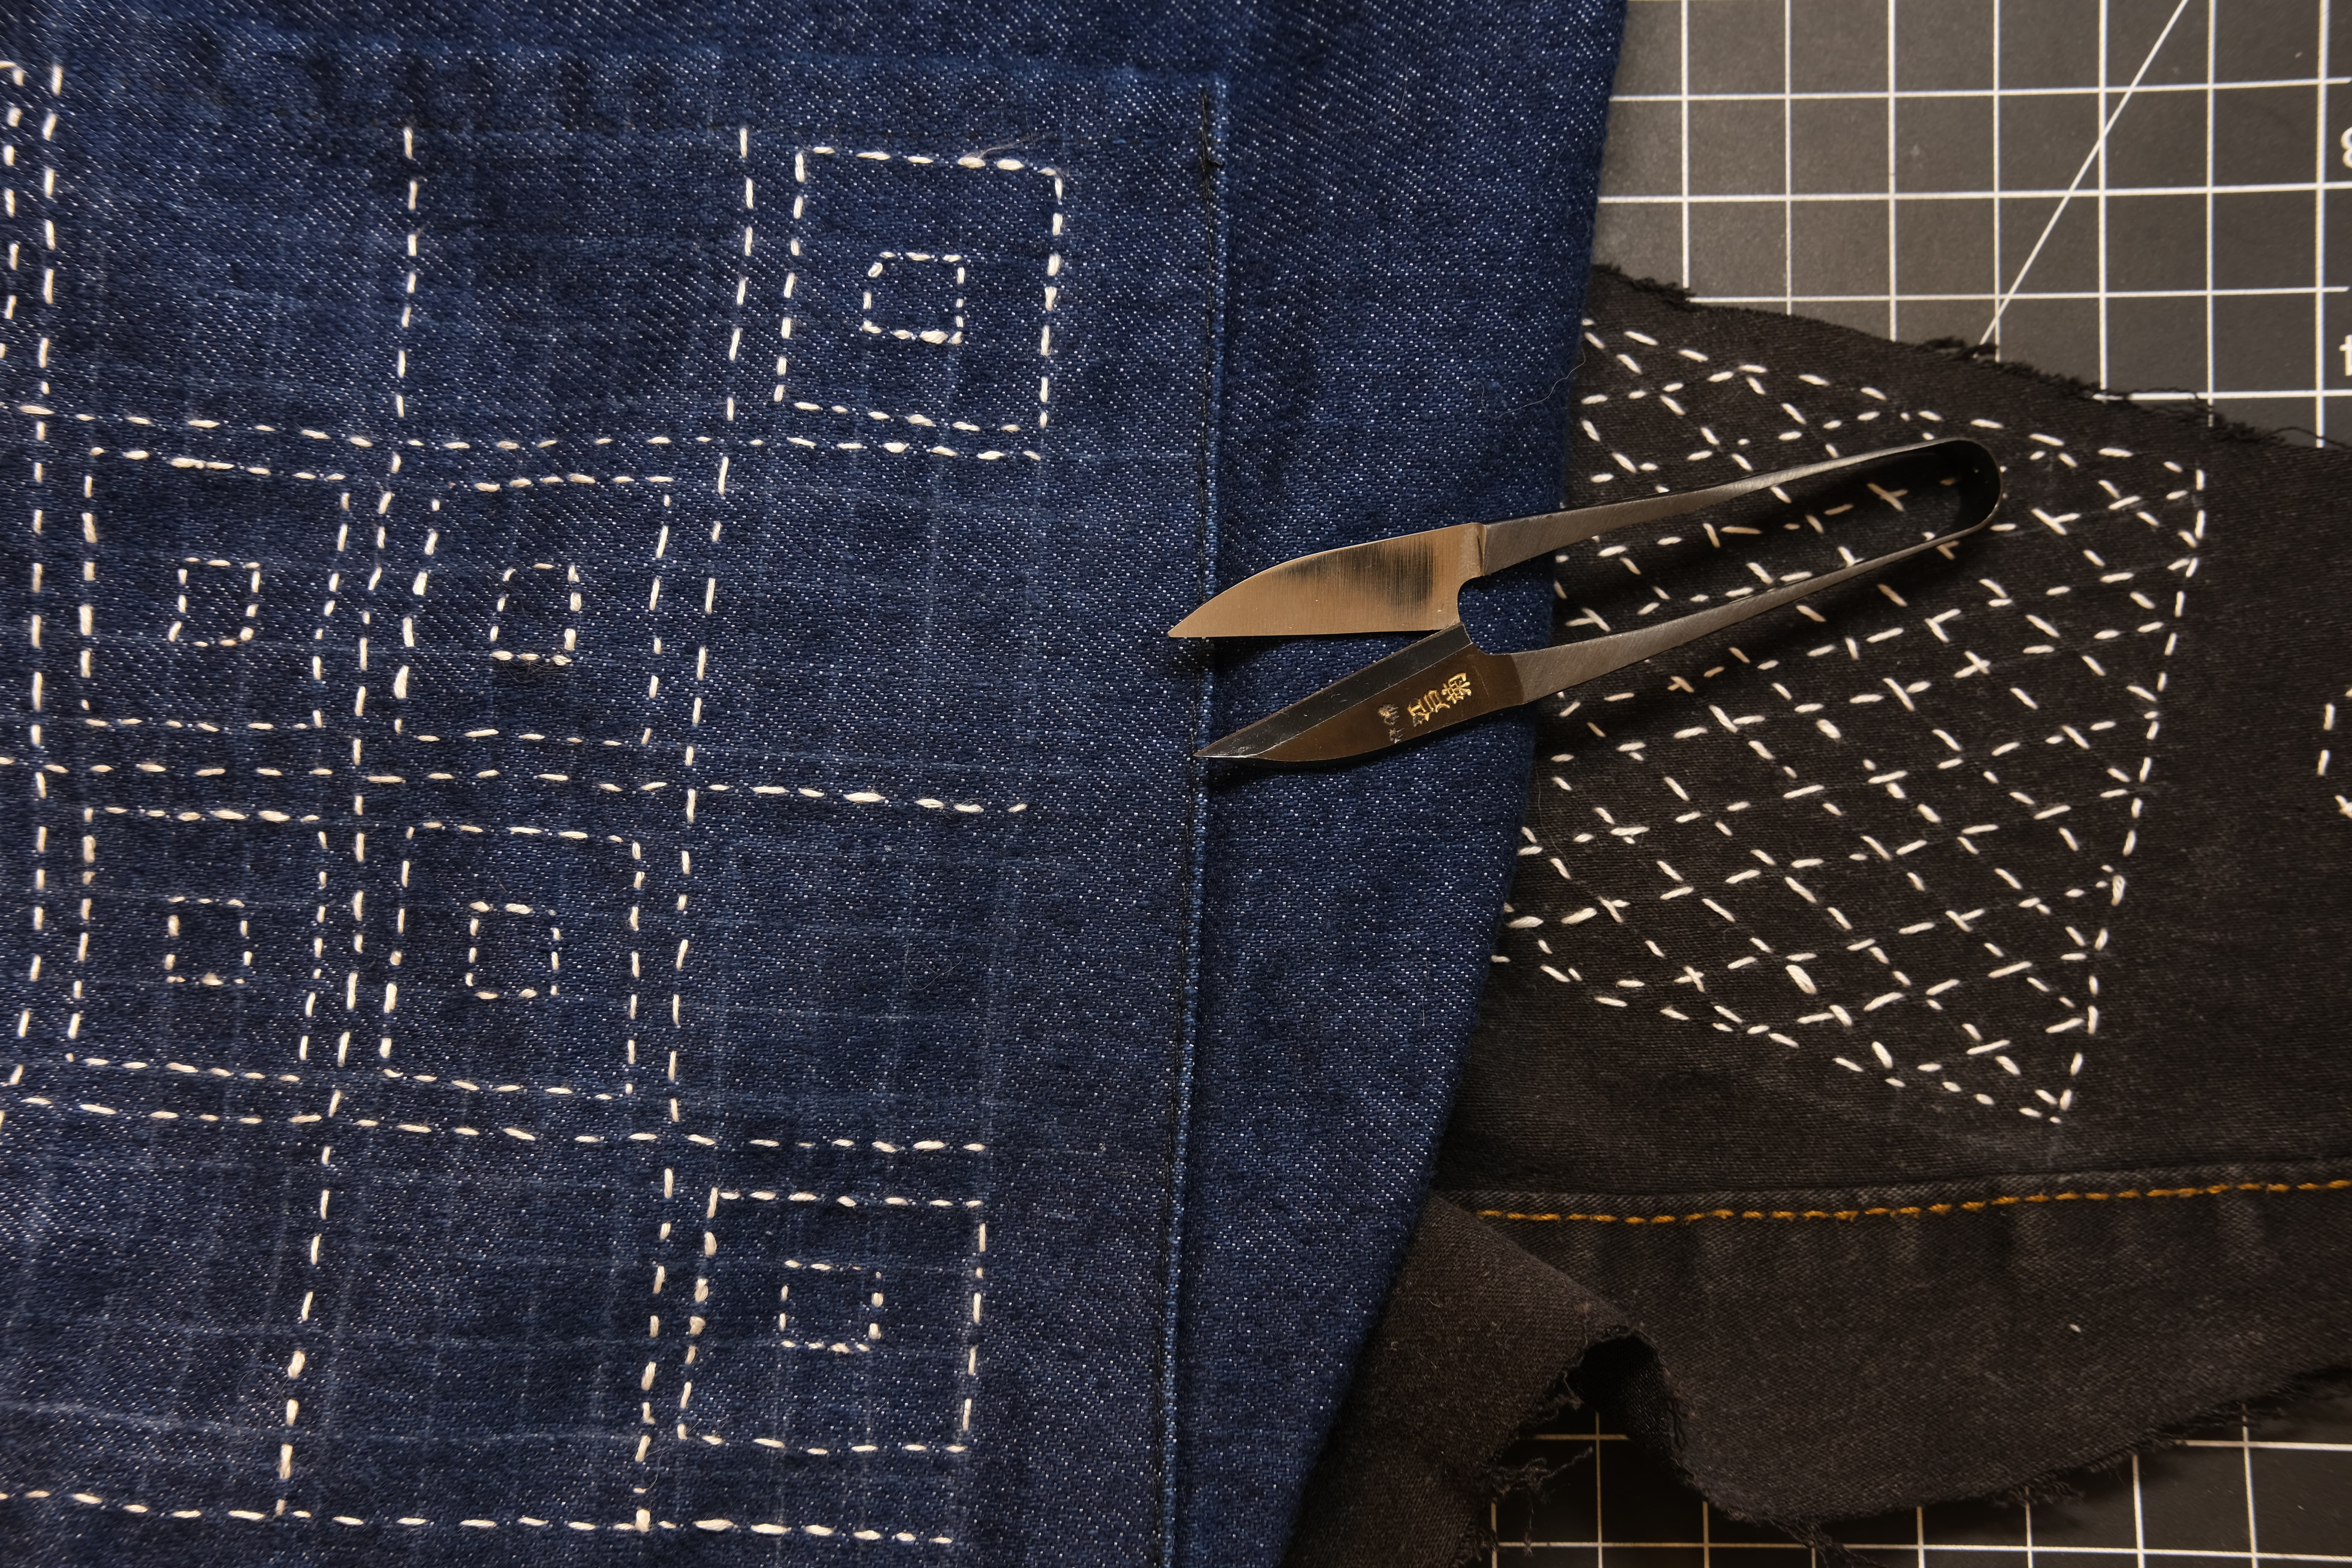 indigo and black fabric embroidered with geometric patterns in white thread